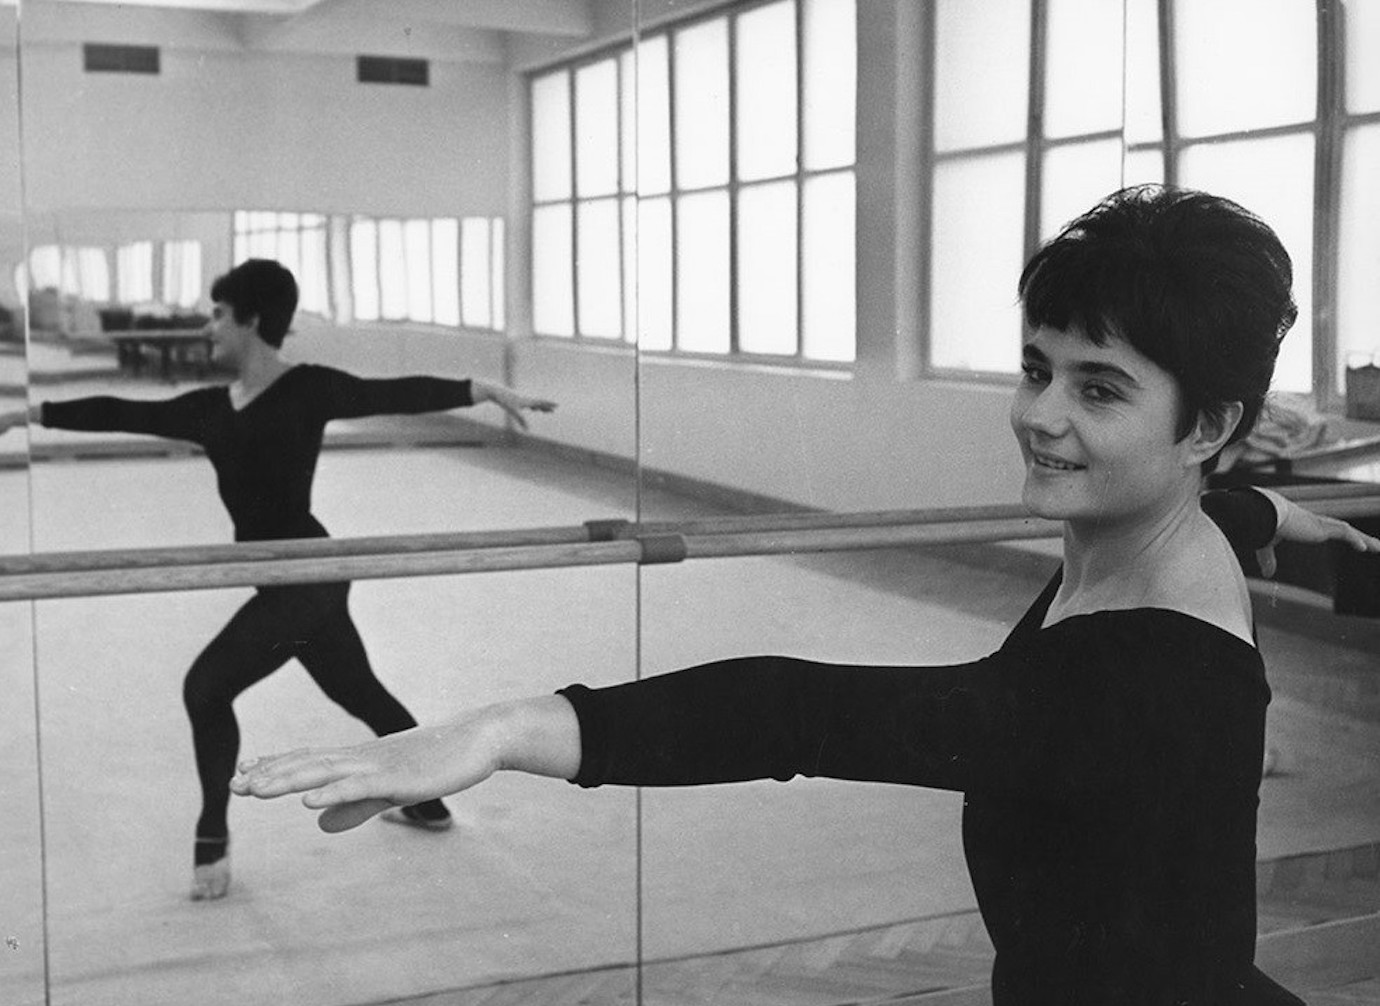 Something Different is a feminist Czech New Wave gem featuring an Olympic icon | Film of the Week